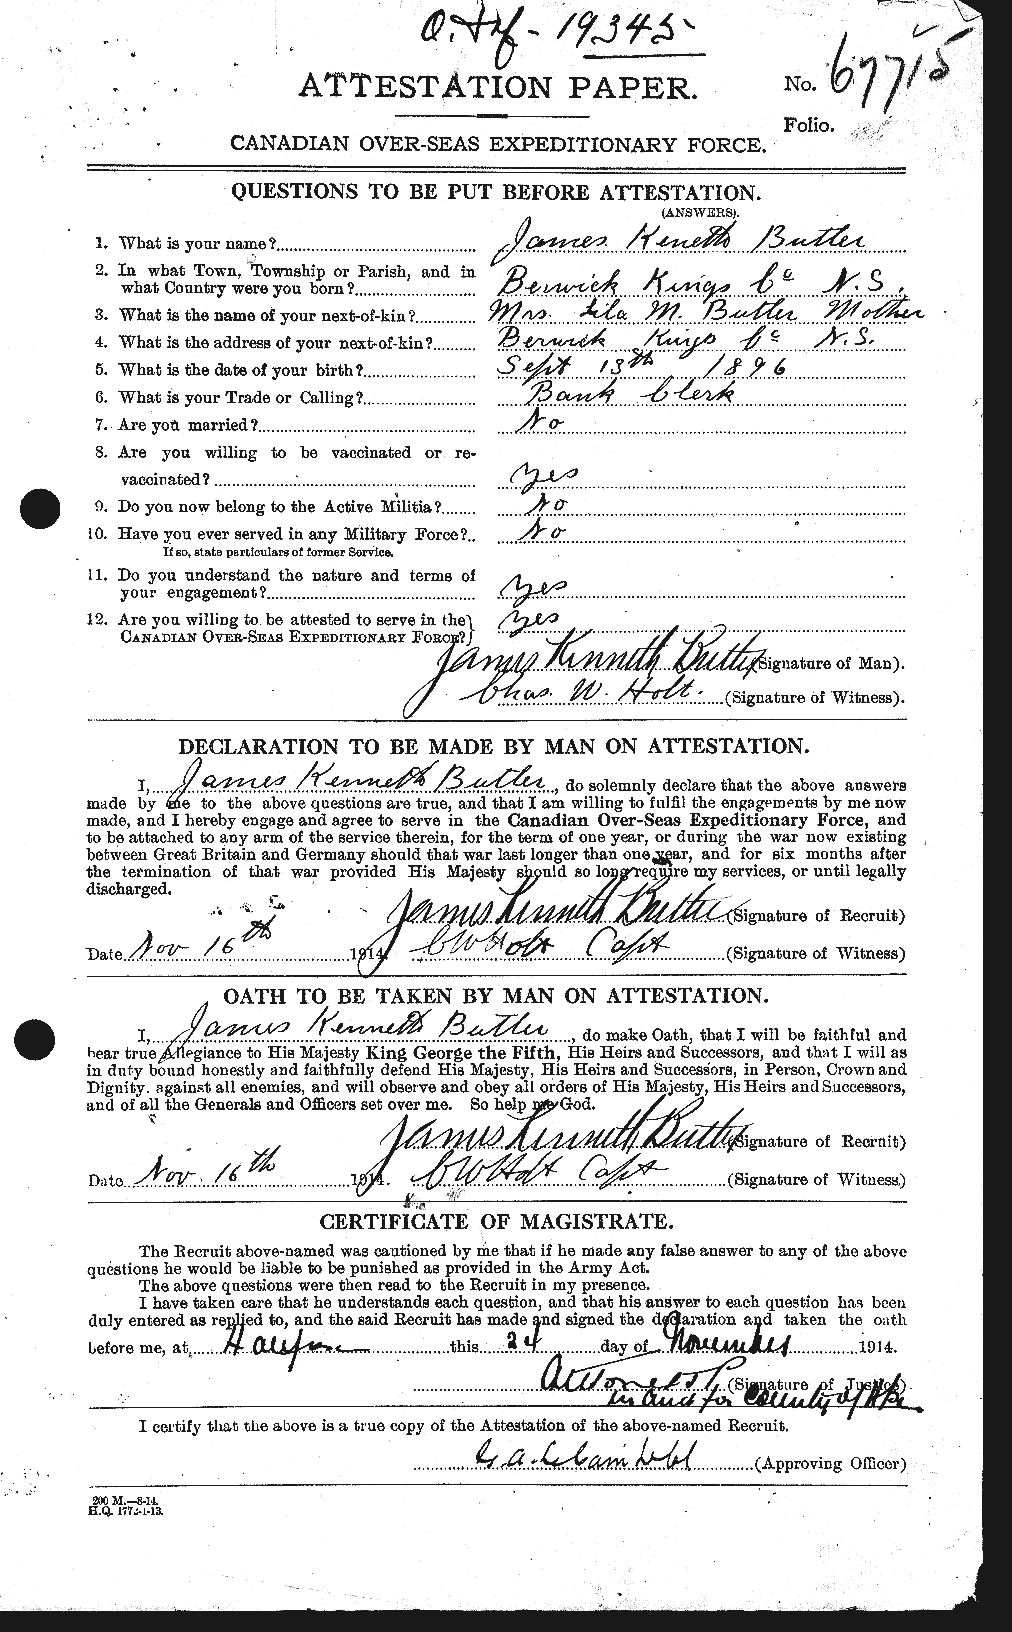 Personnel Records of the First World War - CEF 276003a